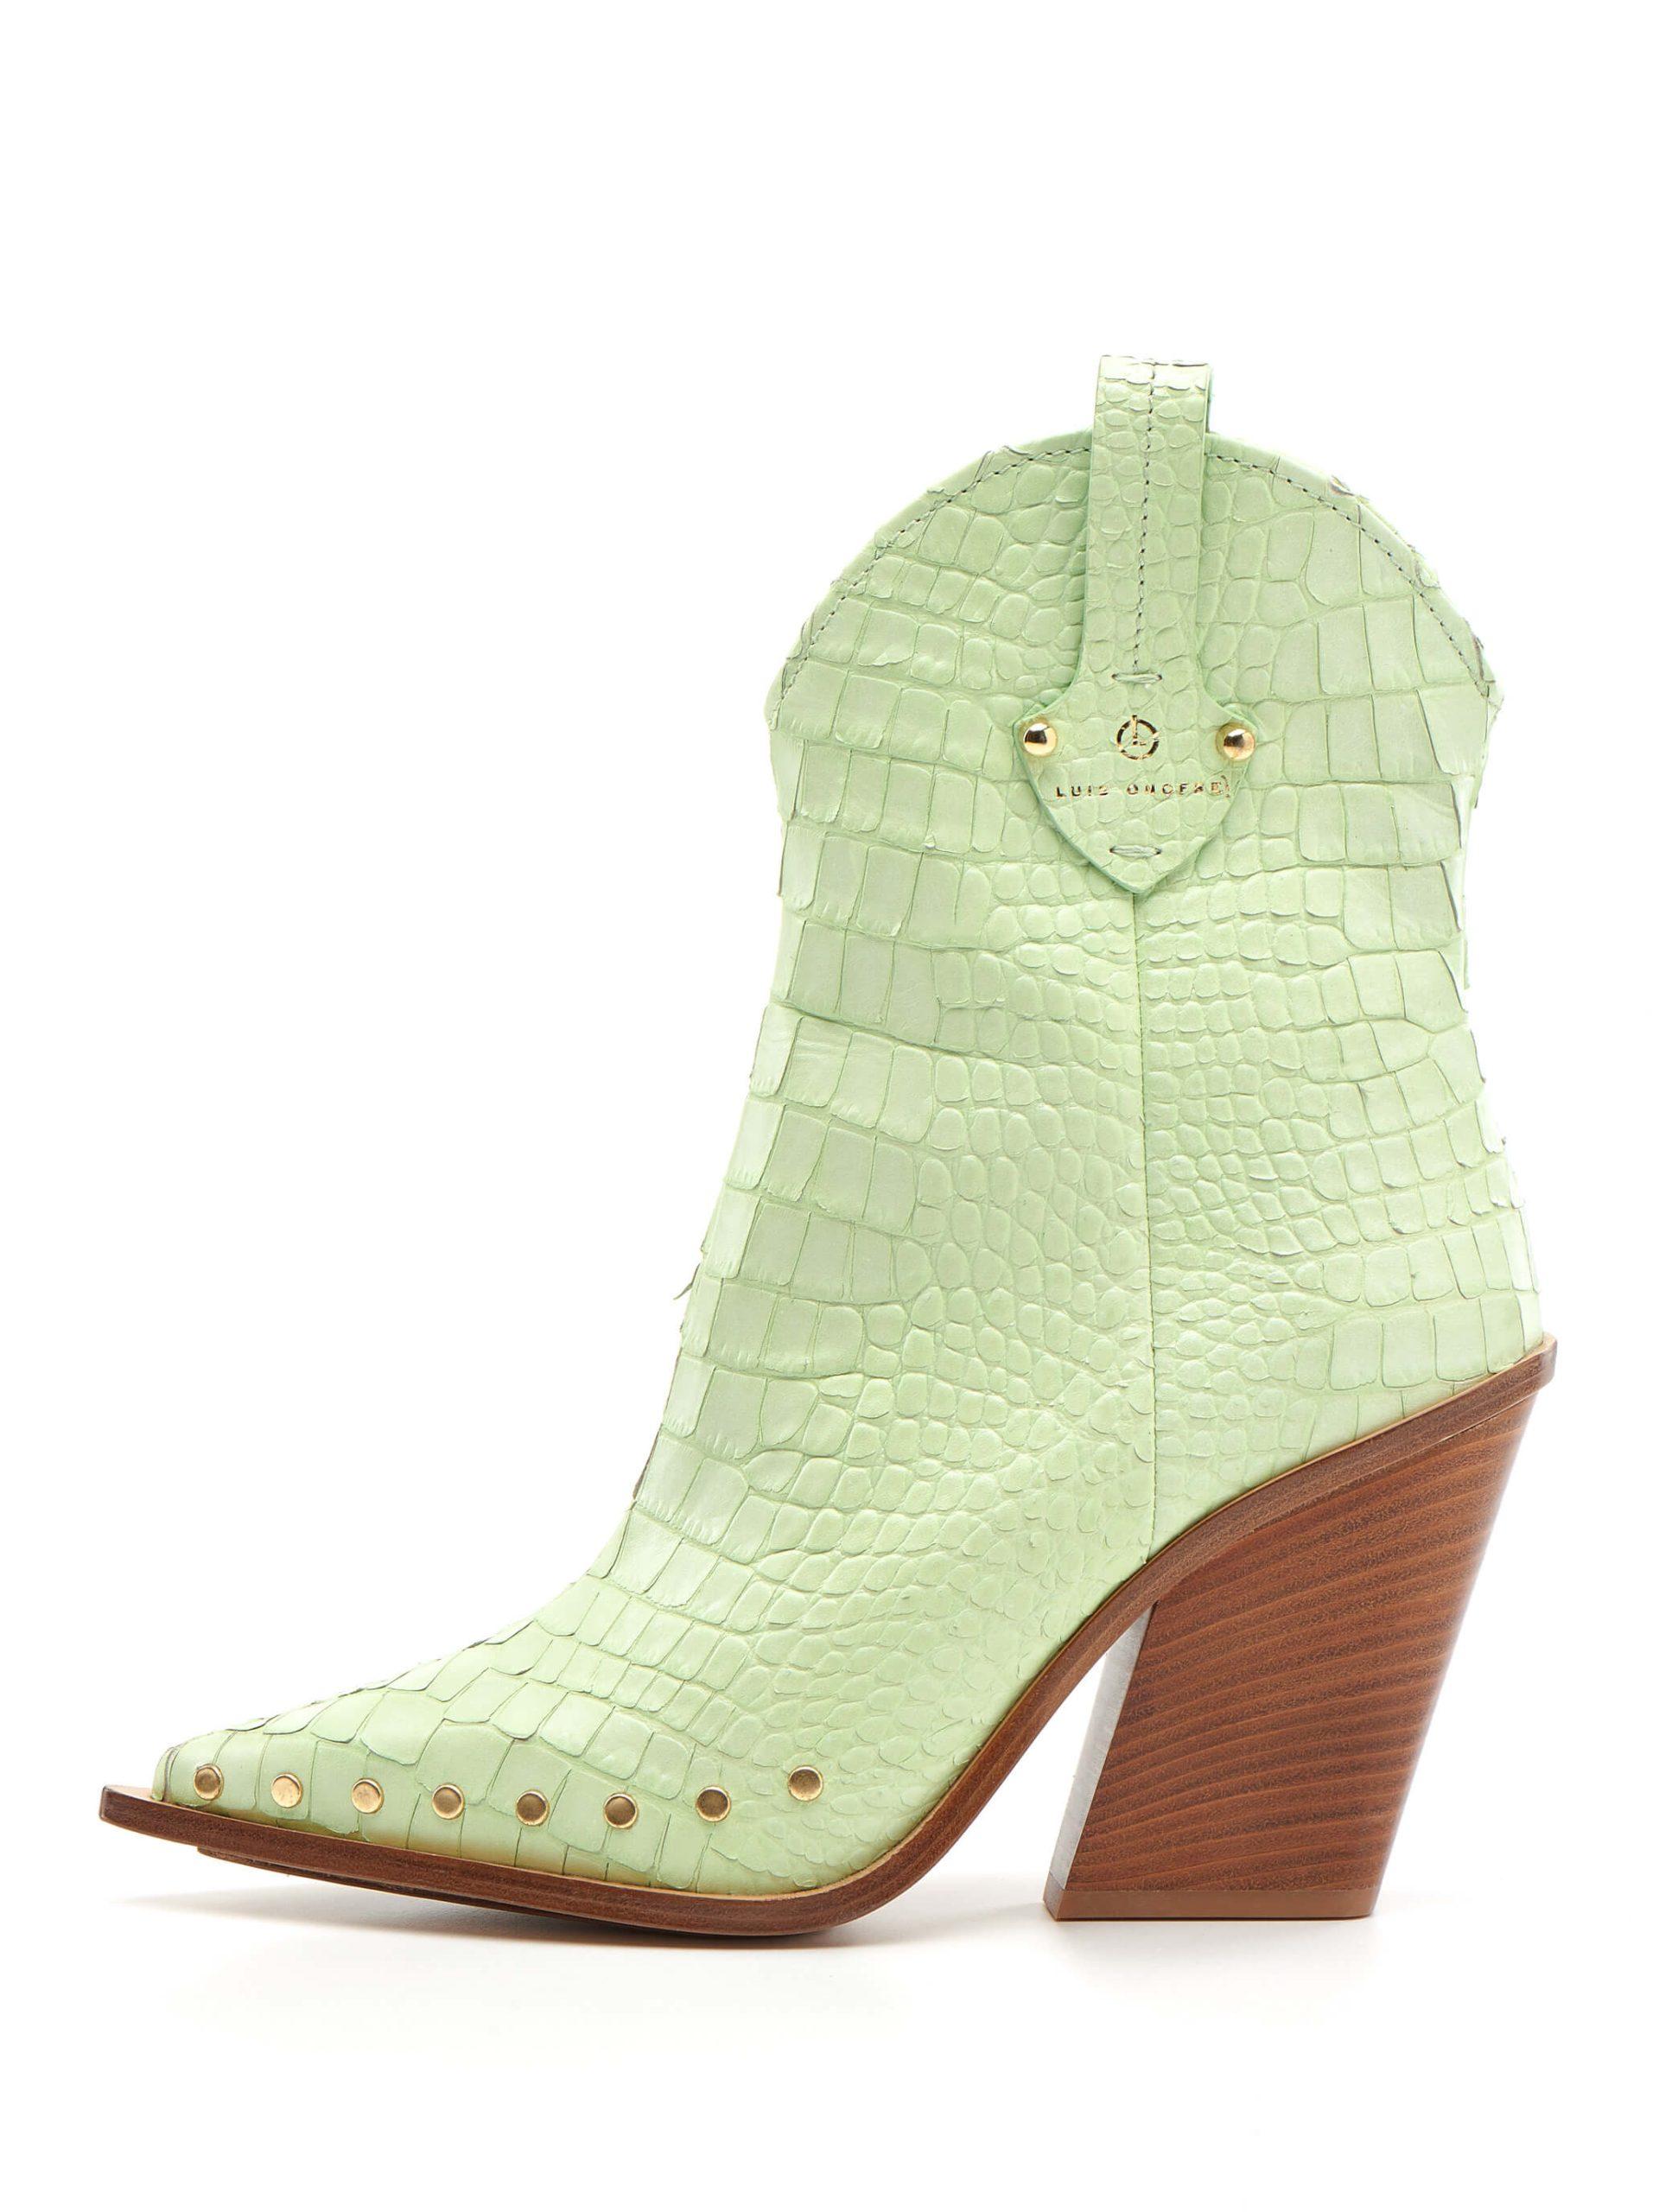 Texas ankle boot in green